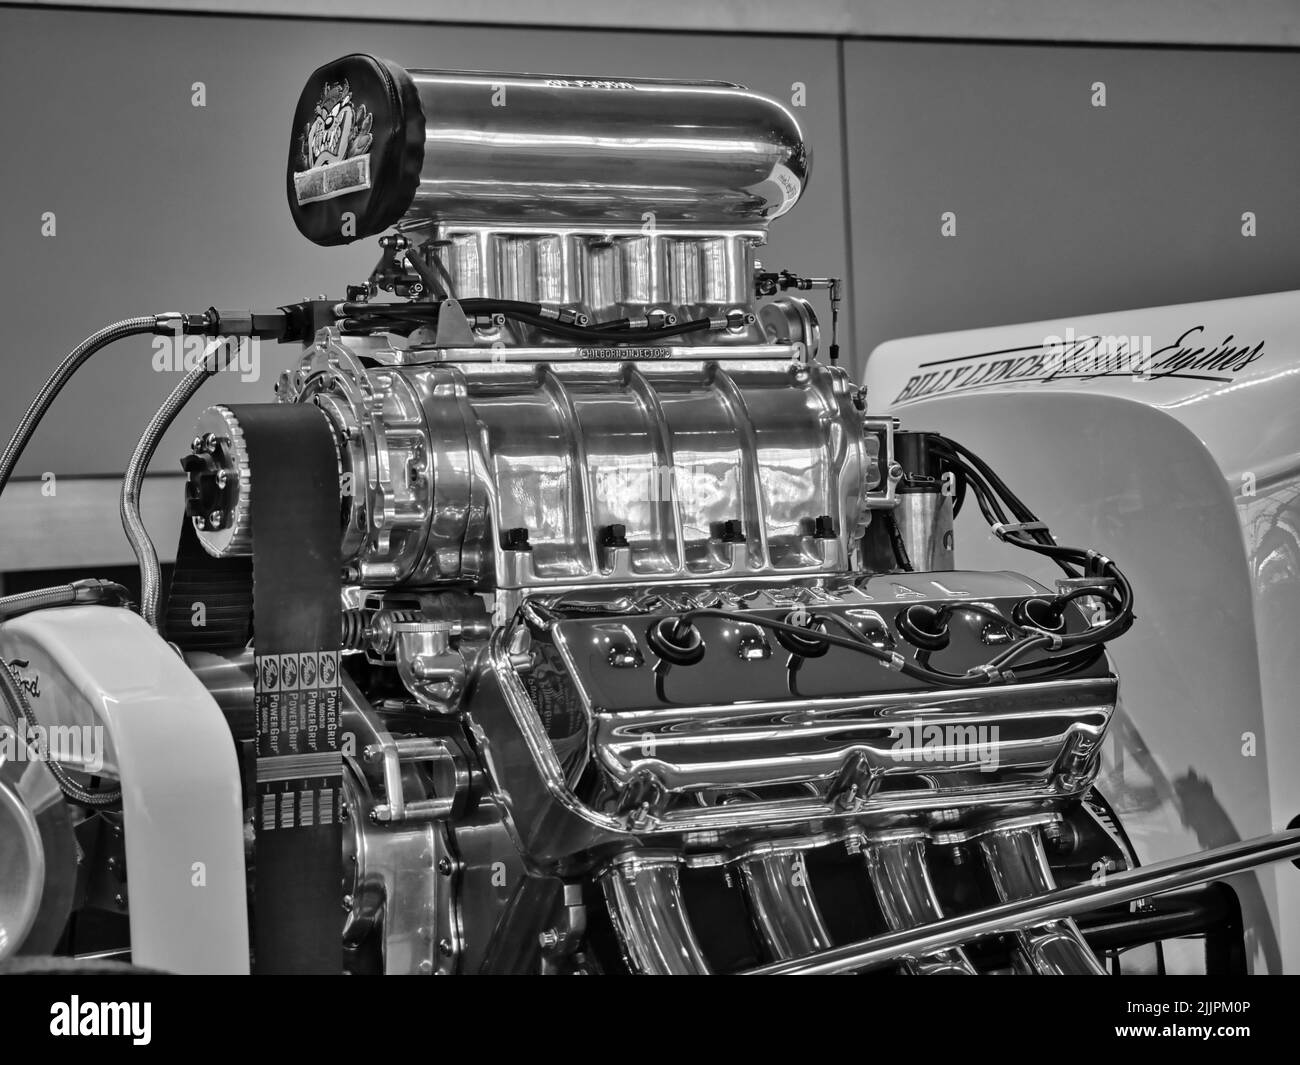 A grayscale shot of a highly chromed dragster racing engine. Stock Photo